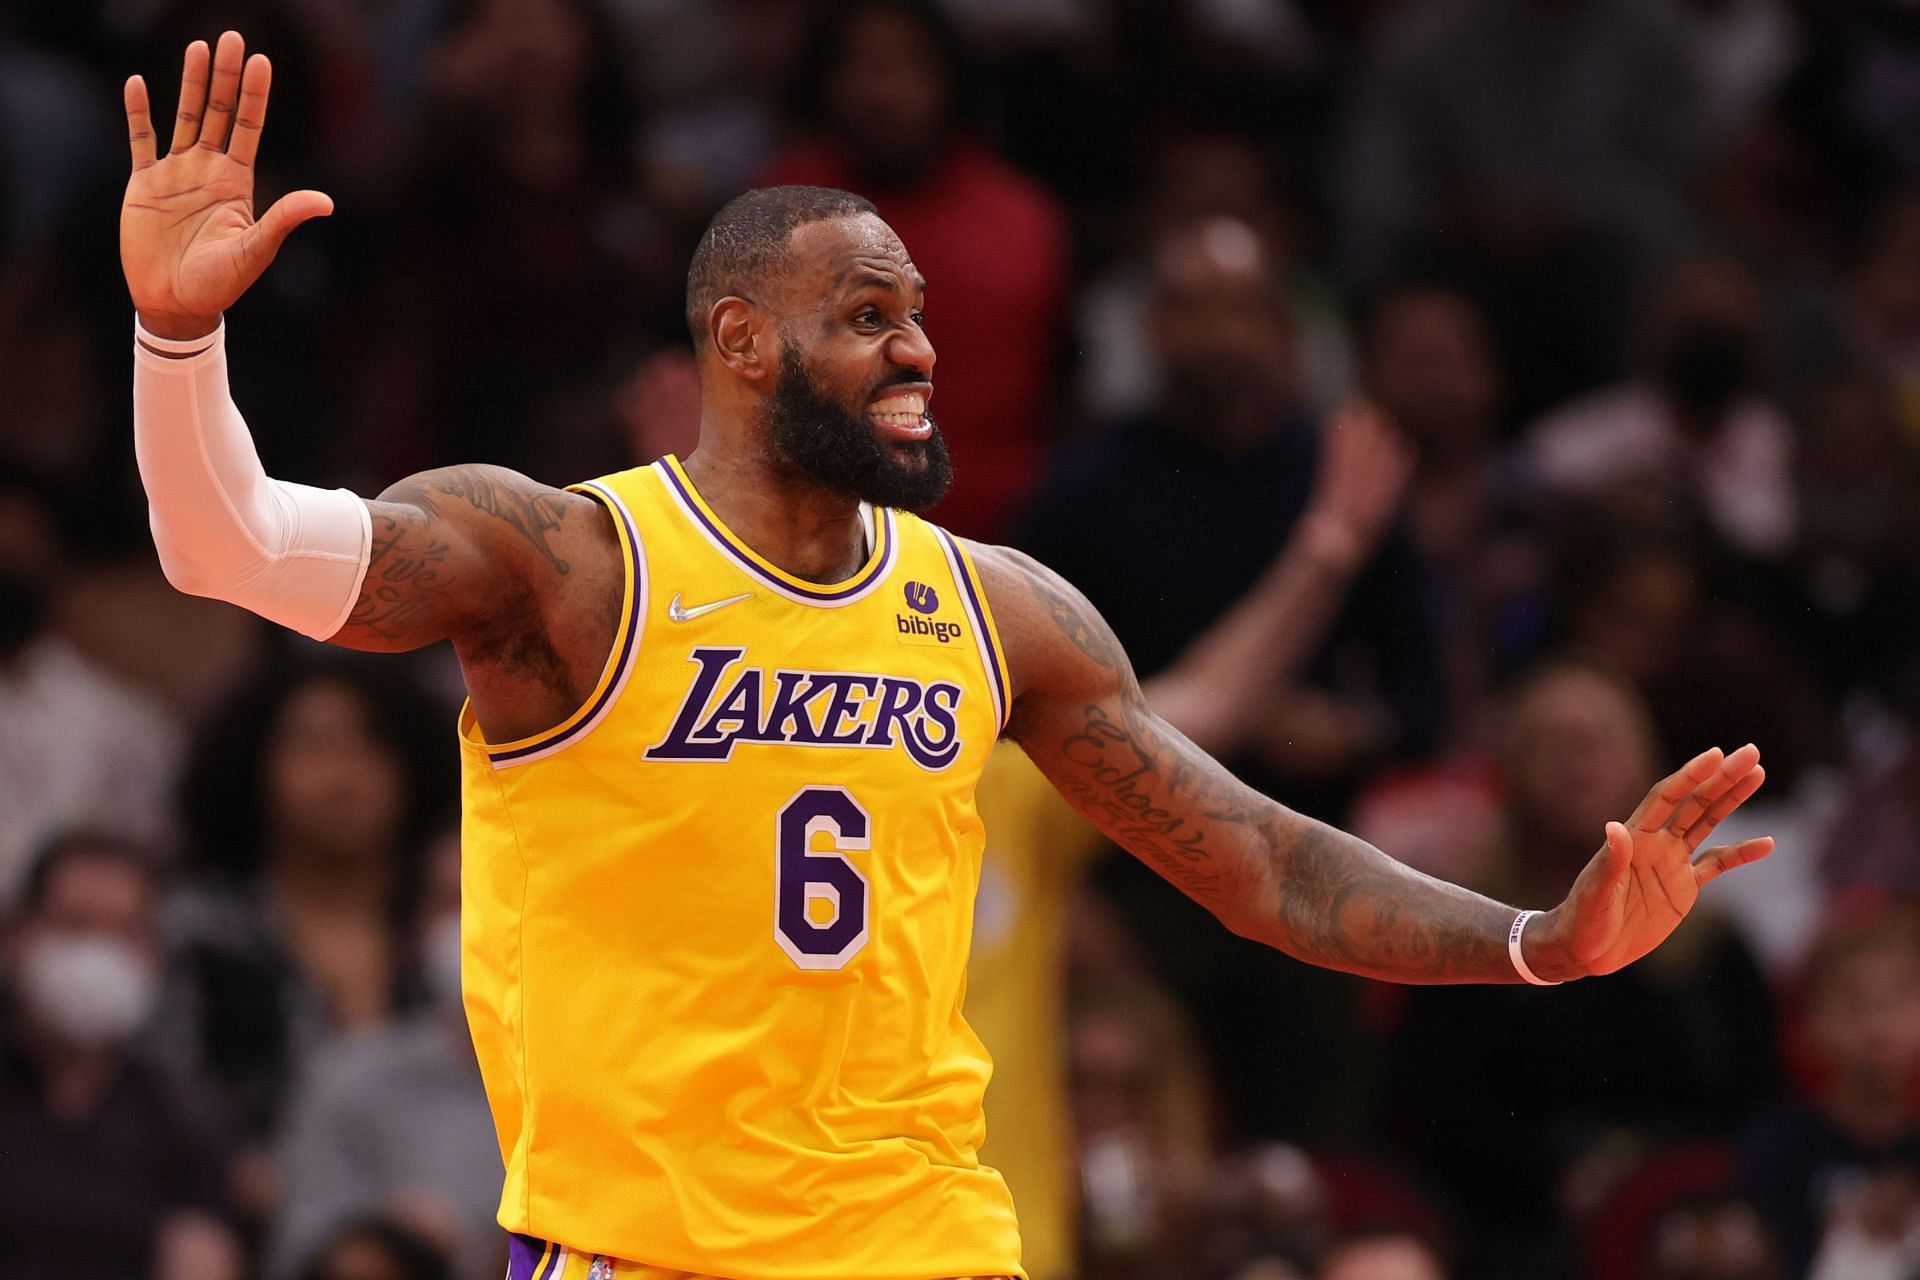 LeBron James and Malik Monk combined for 52 points for the LA Lakers against the Memphis Grizzlies